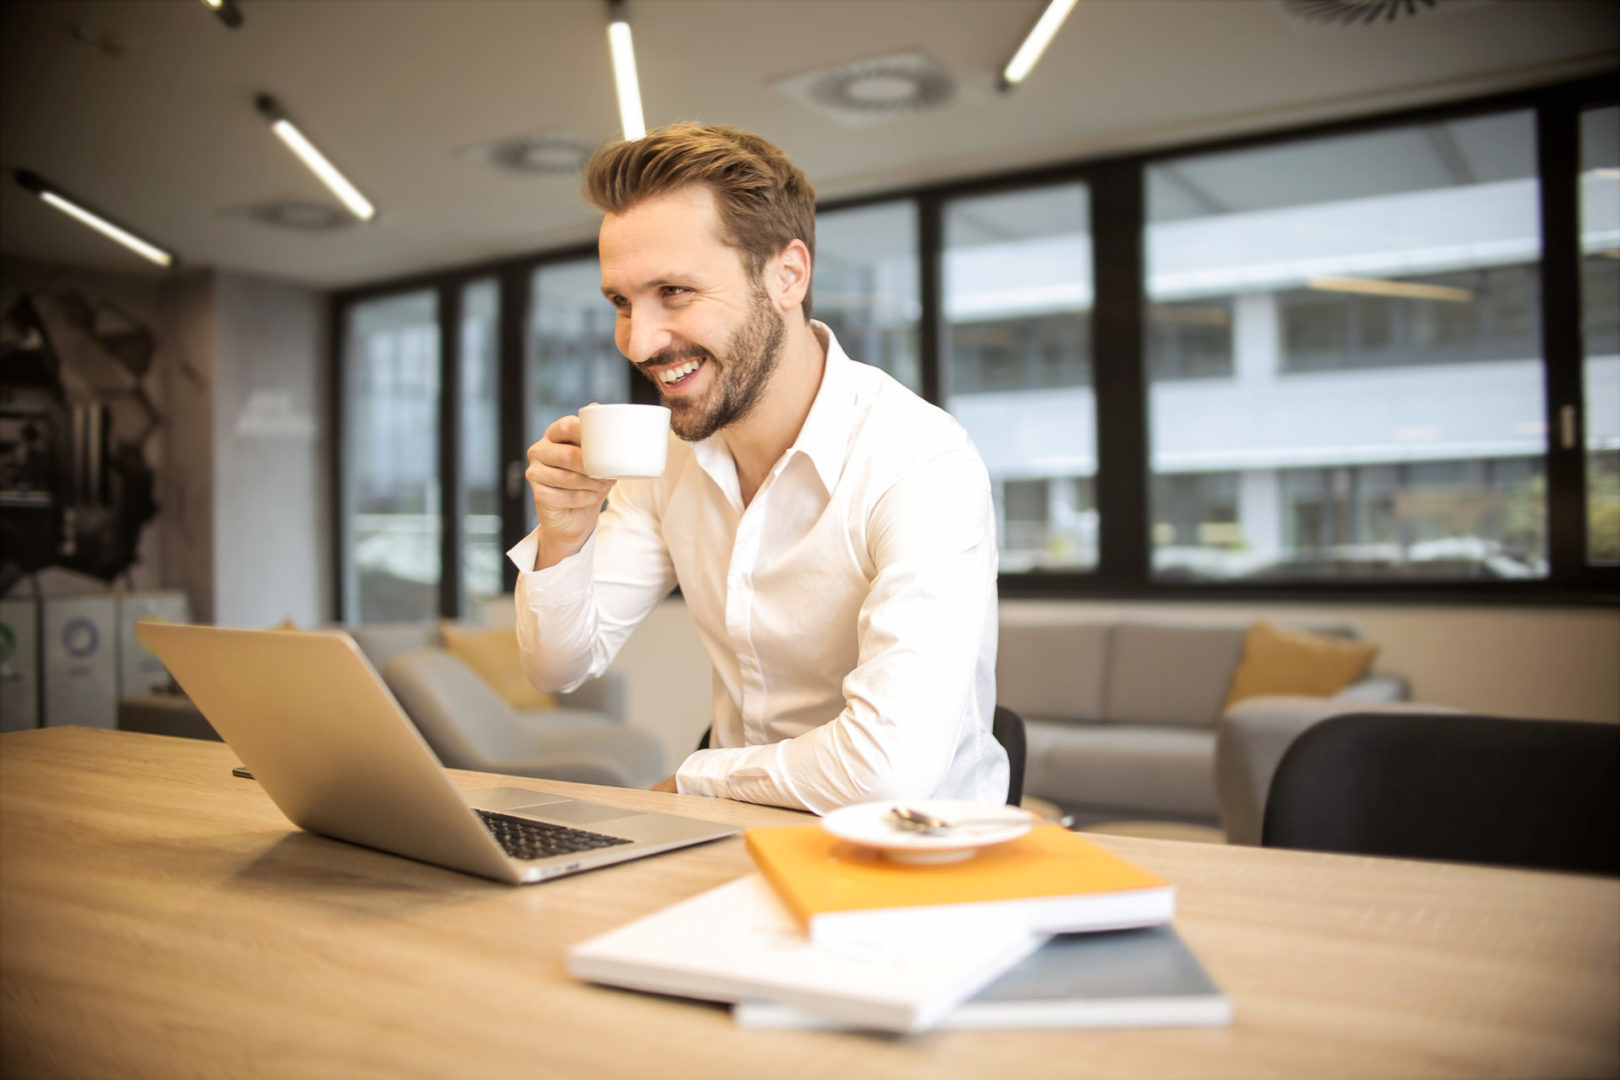 Man at desk with computer enjoying content filtering